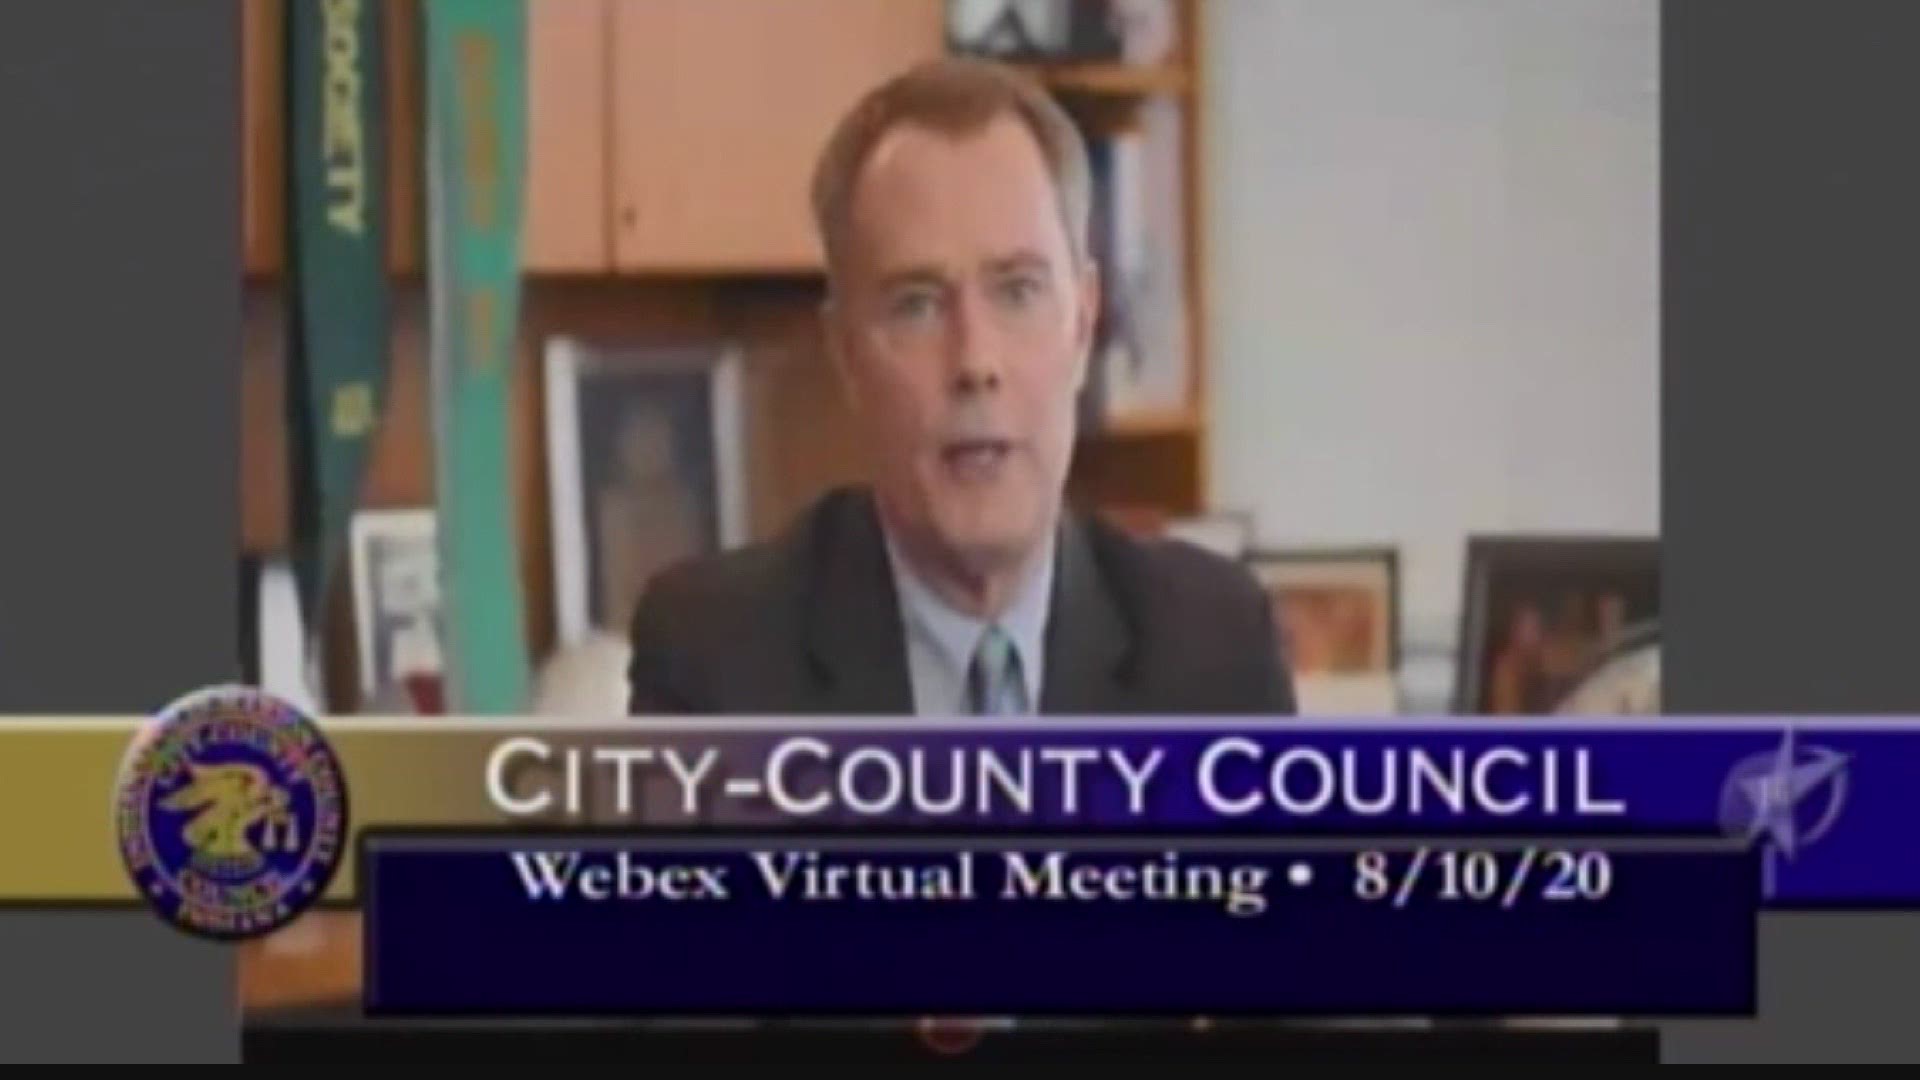 The mayor laid out his proposed budget for next year during a virtual meeting with the City-County Council Monday evening.